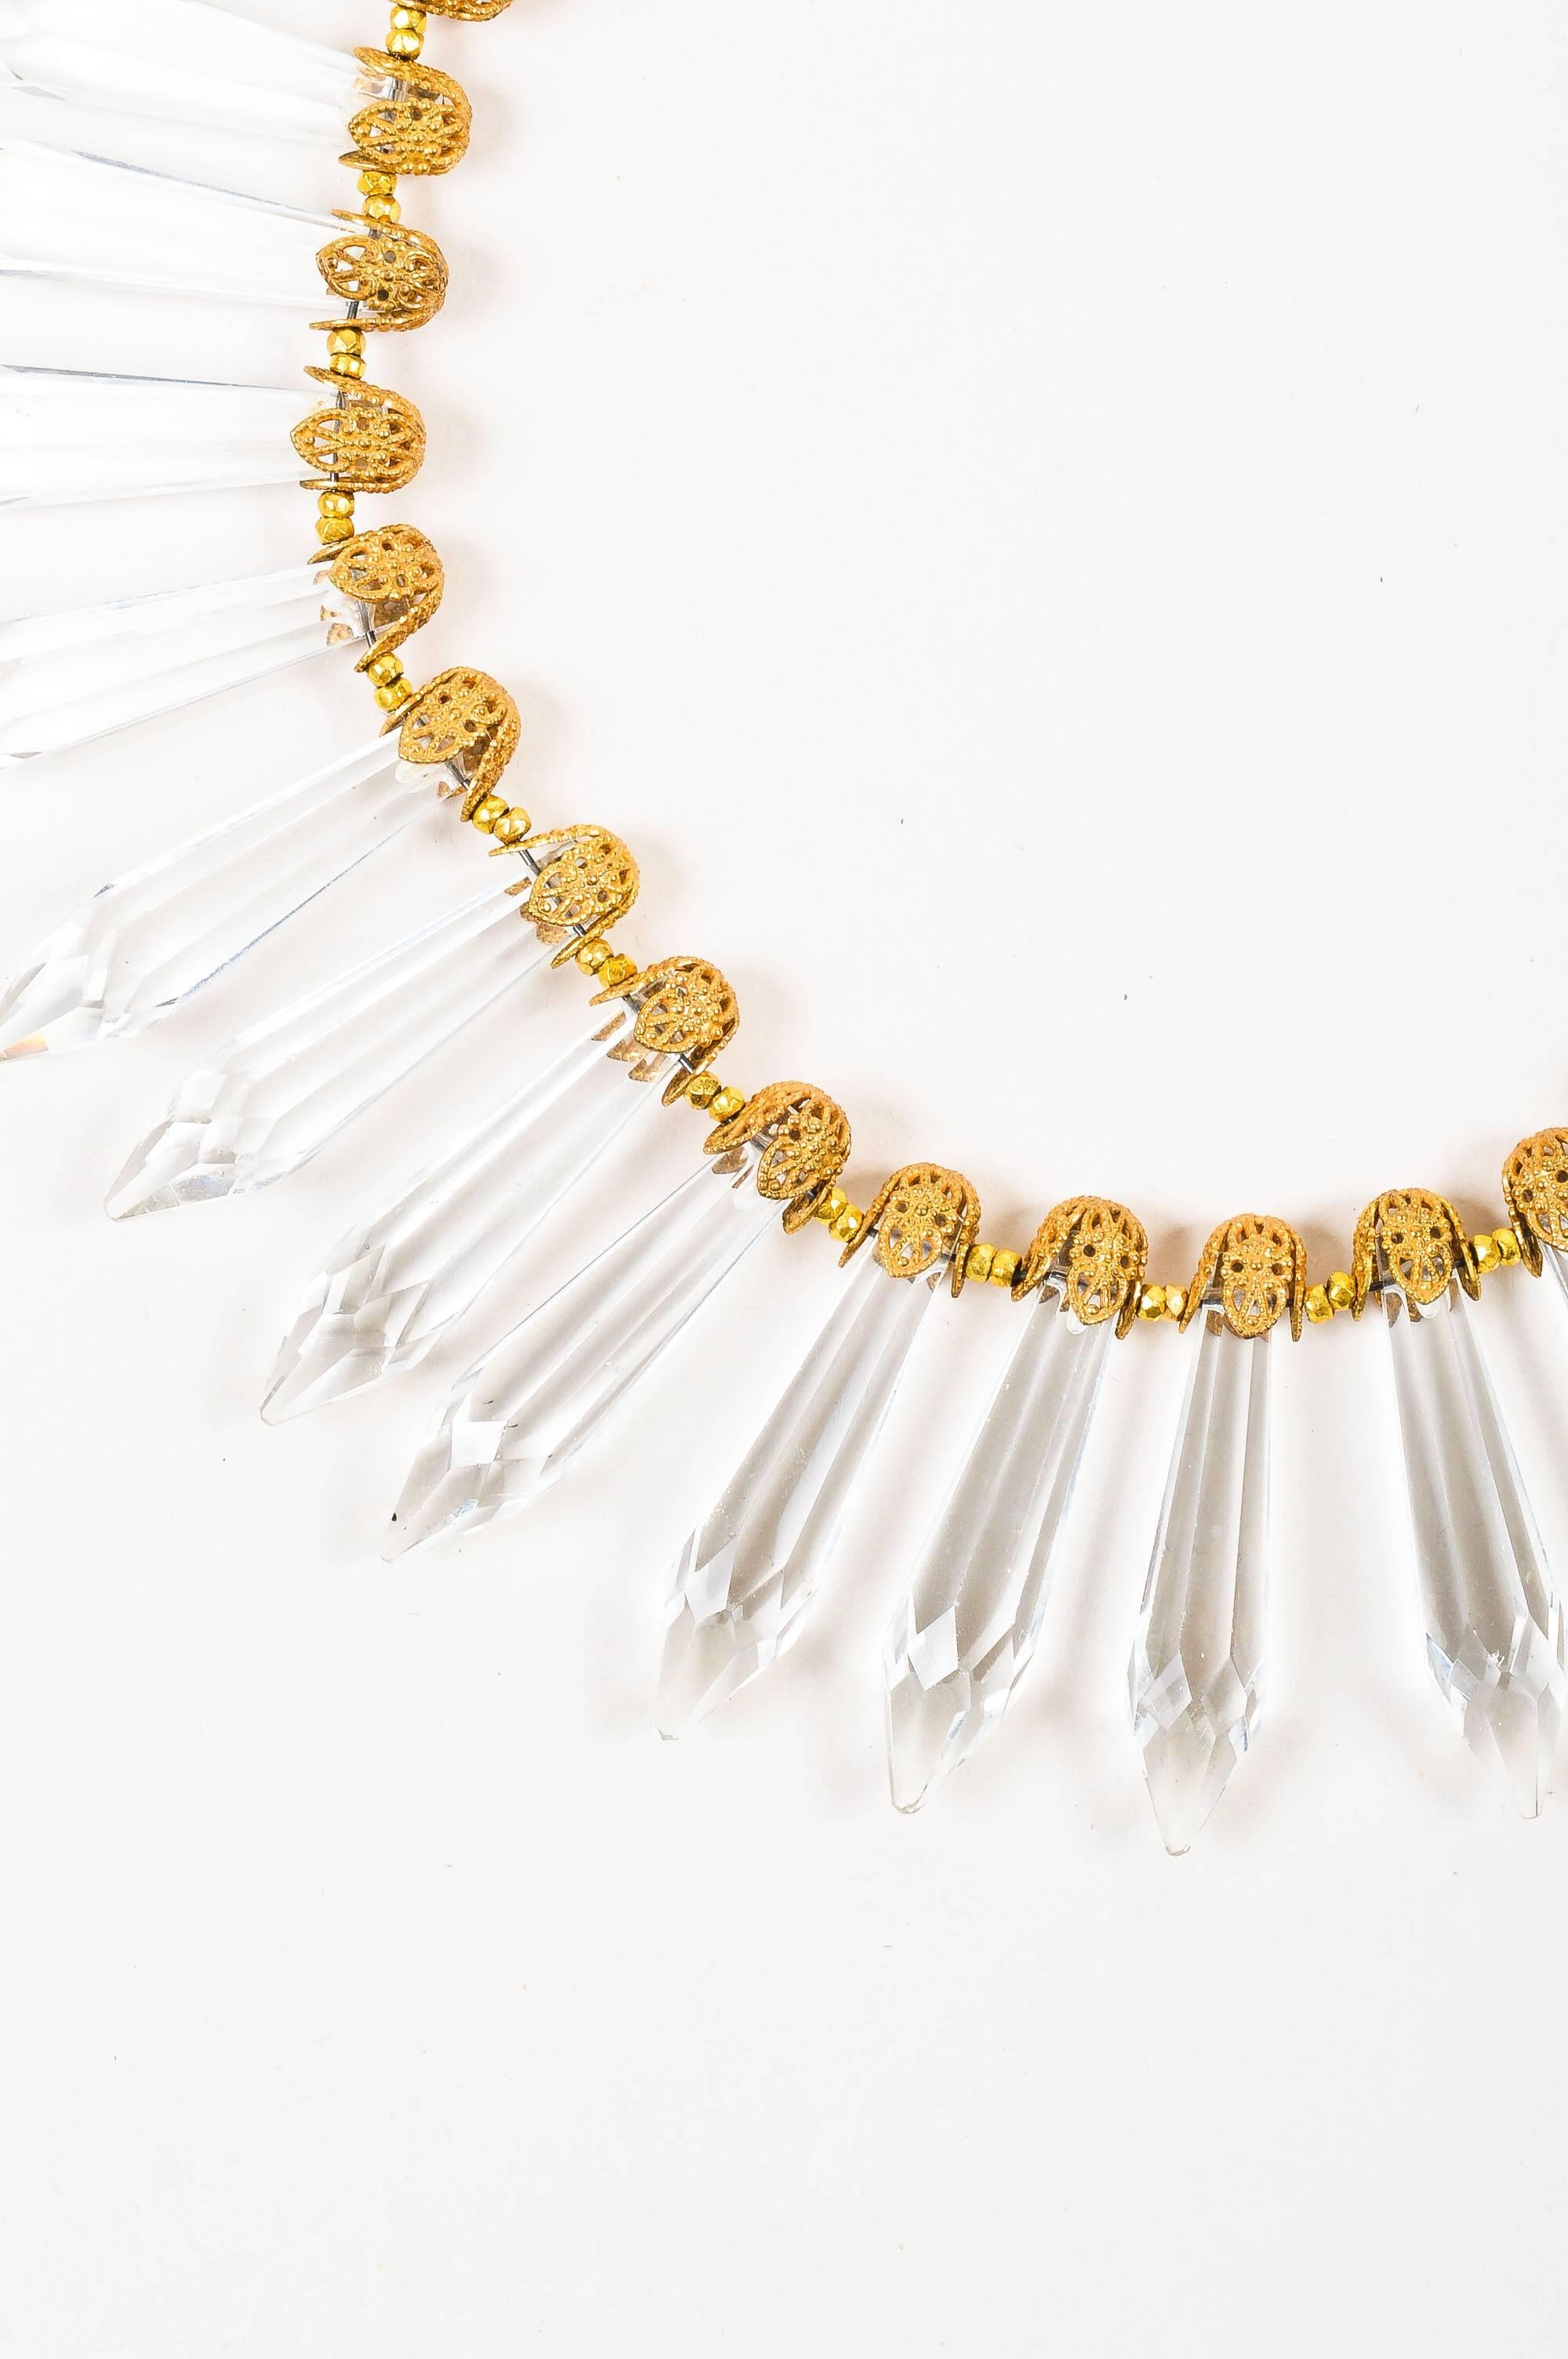 This striking vintage collar necklace is a rare collector's item and sparkling treasure in any jewelry box. Wear on a bare décolletage to let the beautiful design take center stage. Antiqued gold tone openwork end caps hold glass crystal spikes.